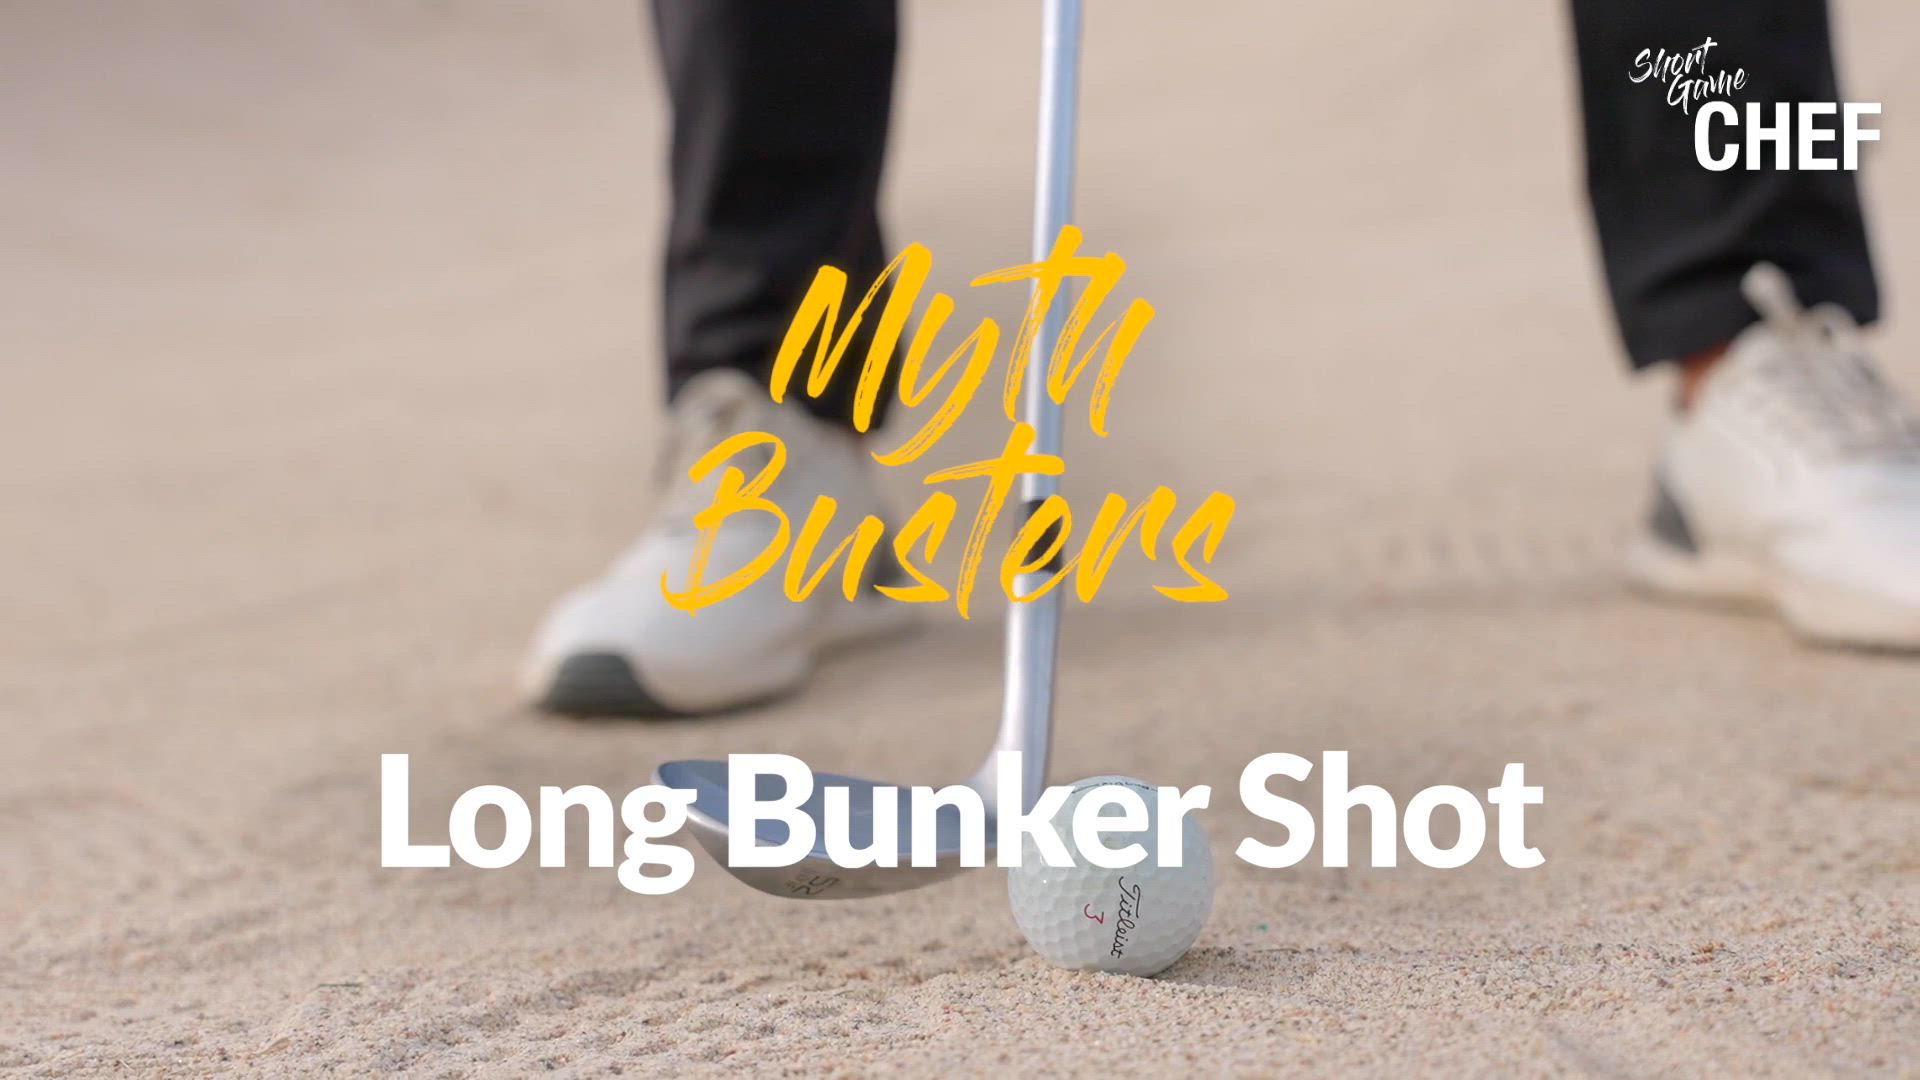 The easiest way to hit a long bunker shot, approved by the pros